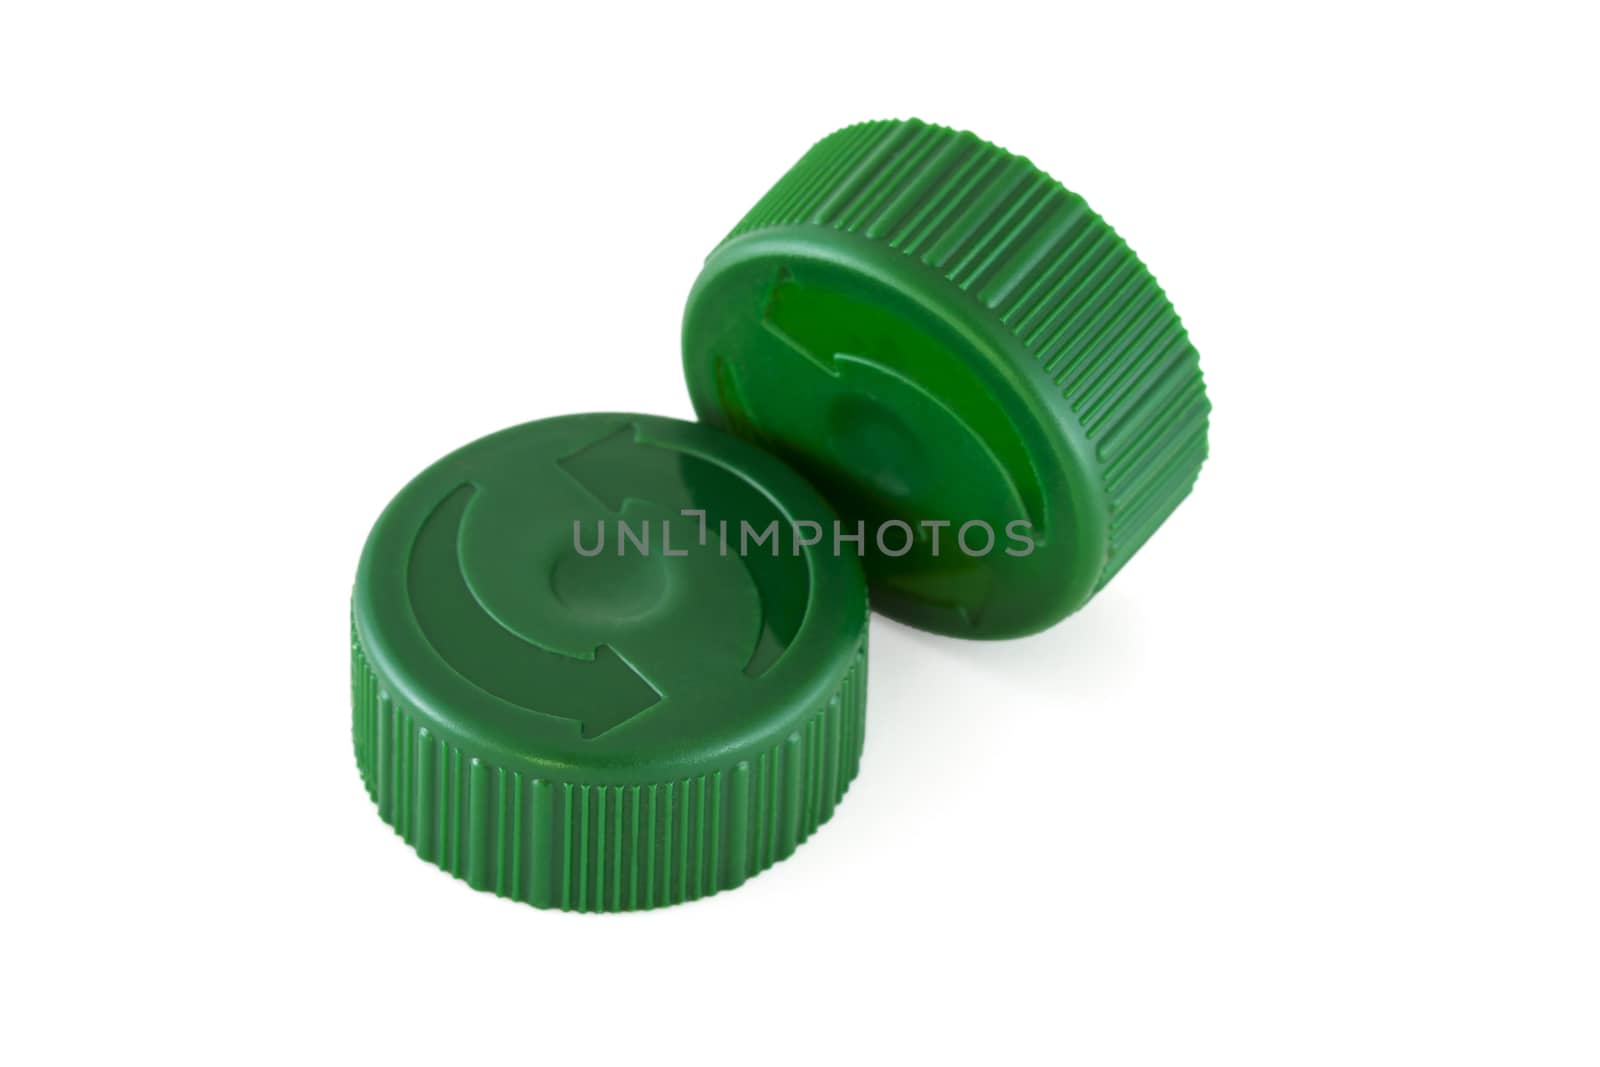 Two green plastic bottle caps isolated on white